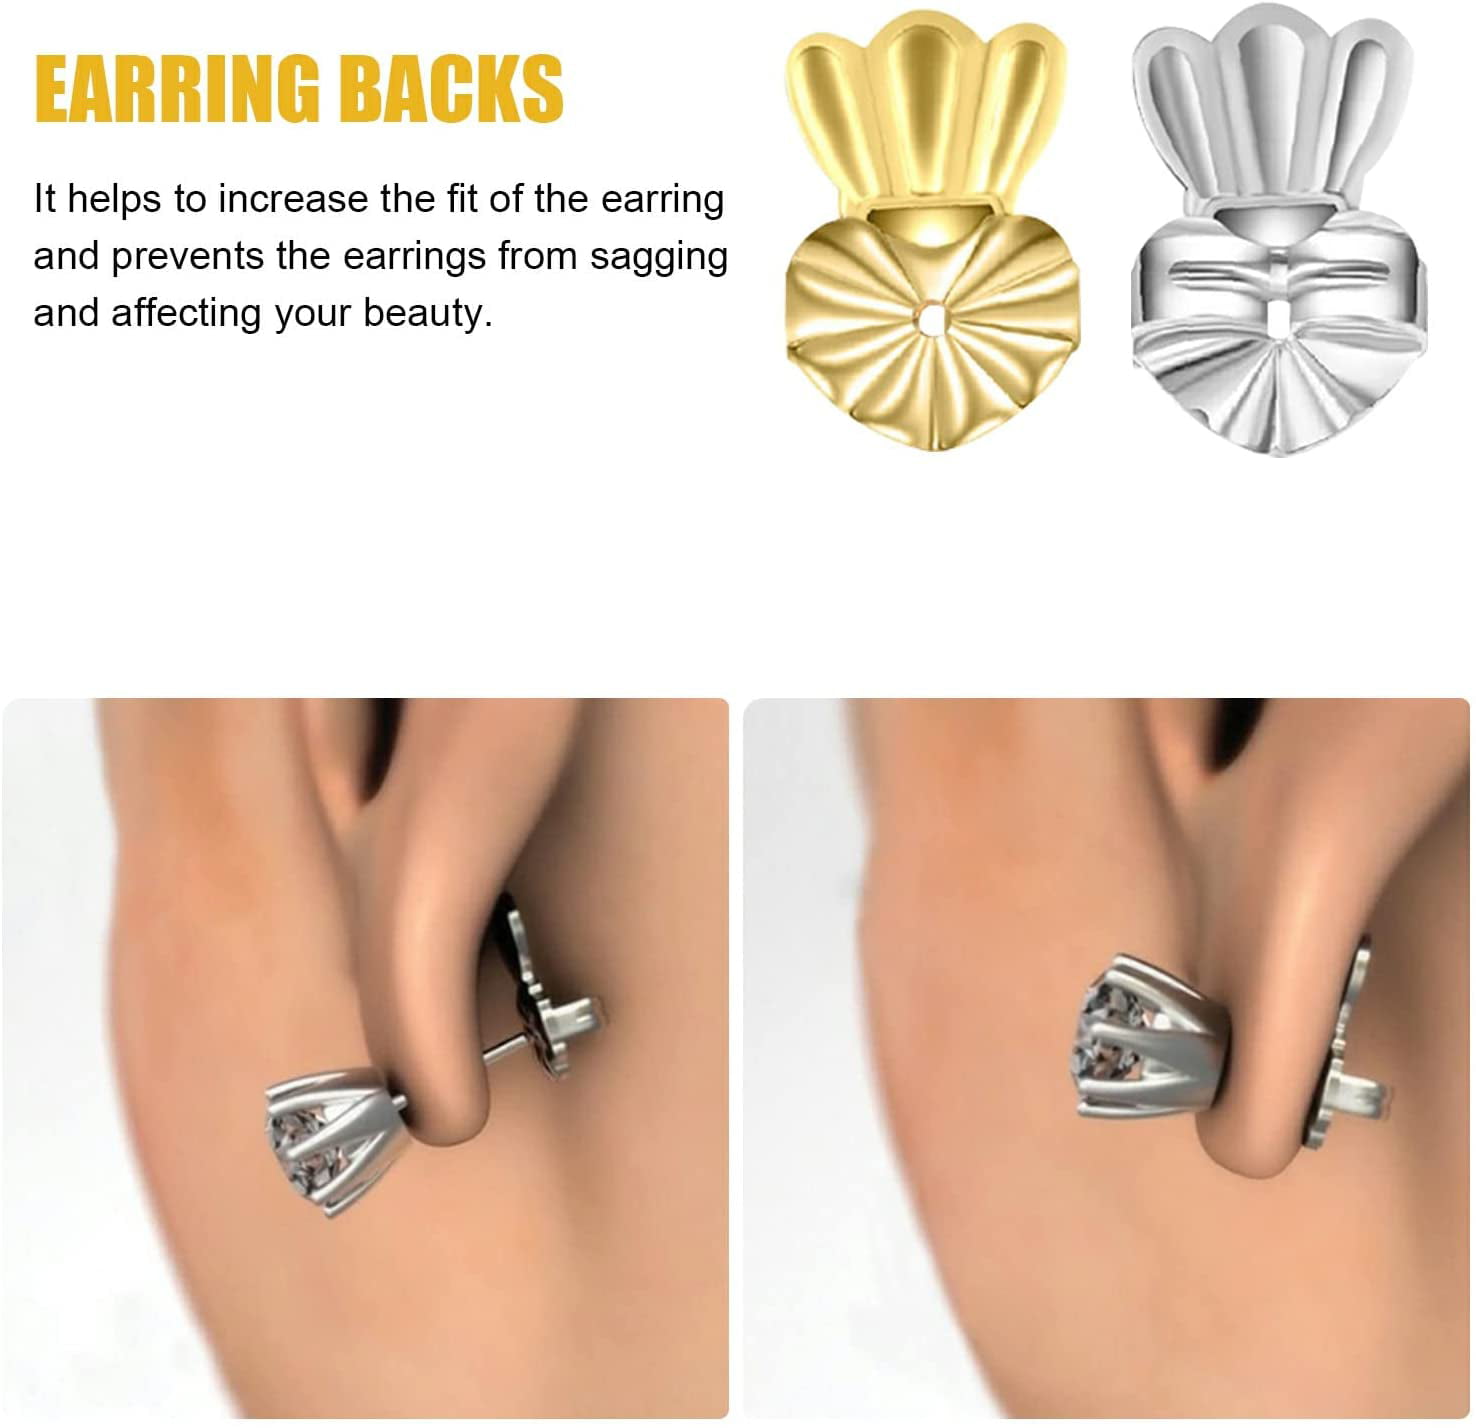 DELECOE Earring Lifters Hypoallergenic Earring Backs for Droopy Ears Adjustable 14K Gold Plated Secure Earring Backs Repacements